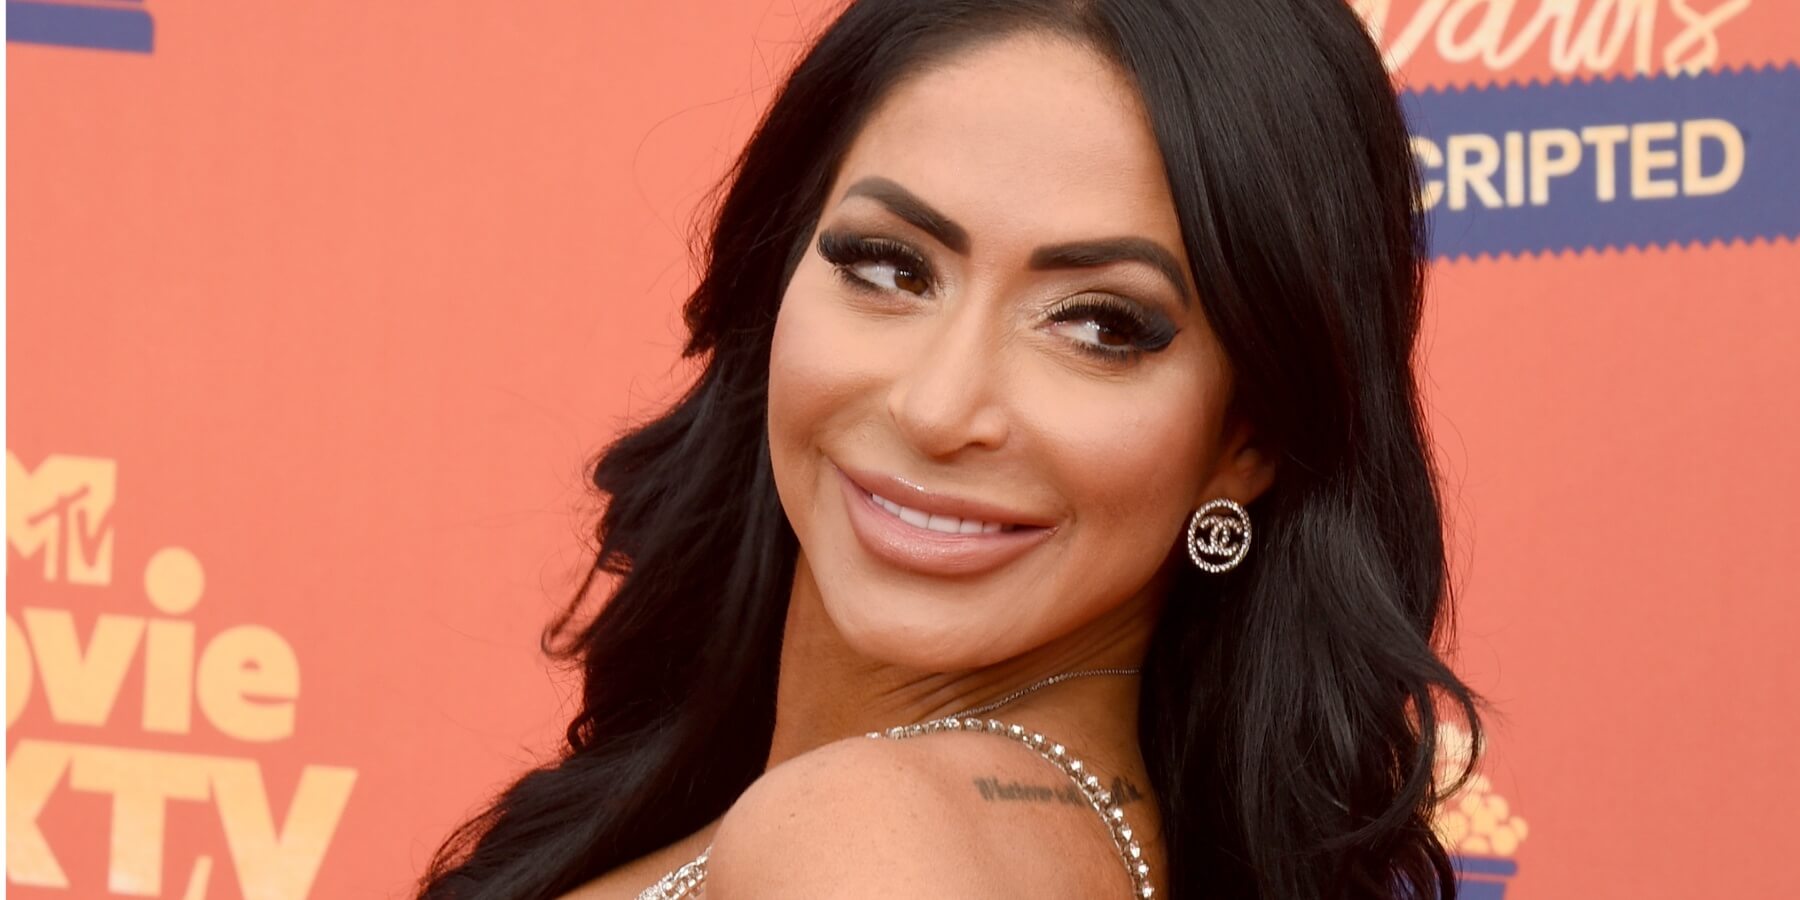 'Jersey Shore' star Angelina Pivarnick has a new podcast titled 'Um, Hello?'